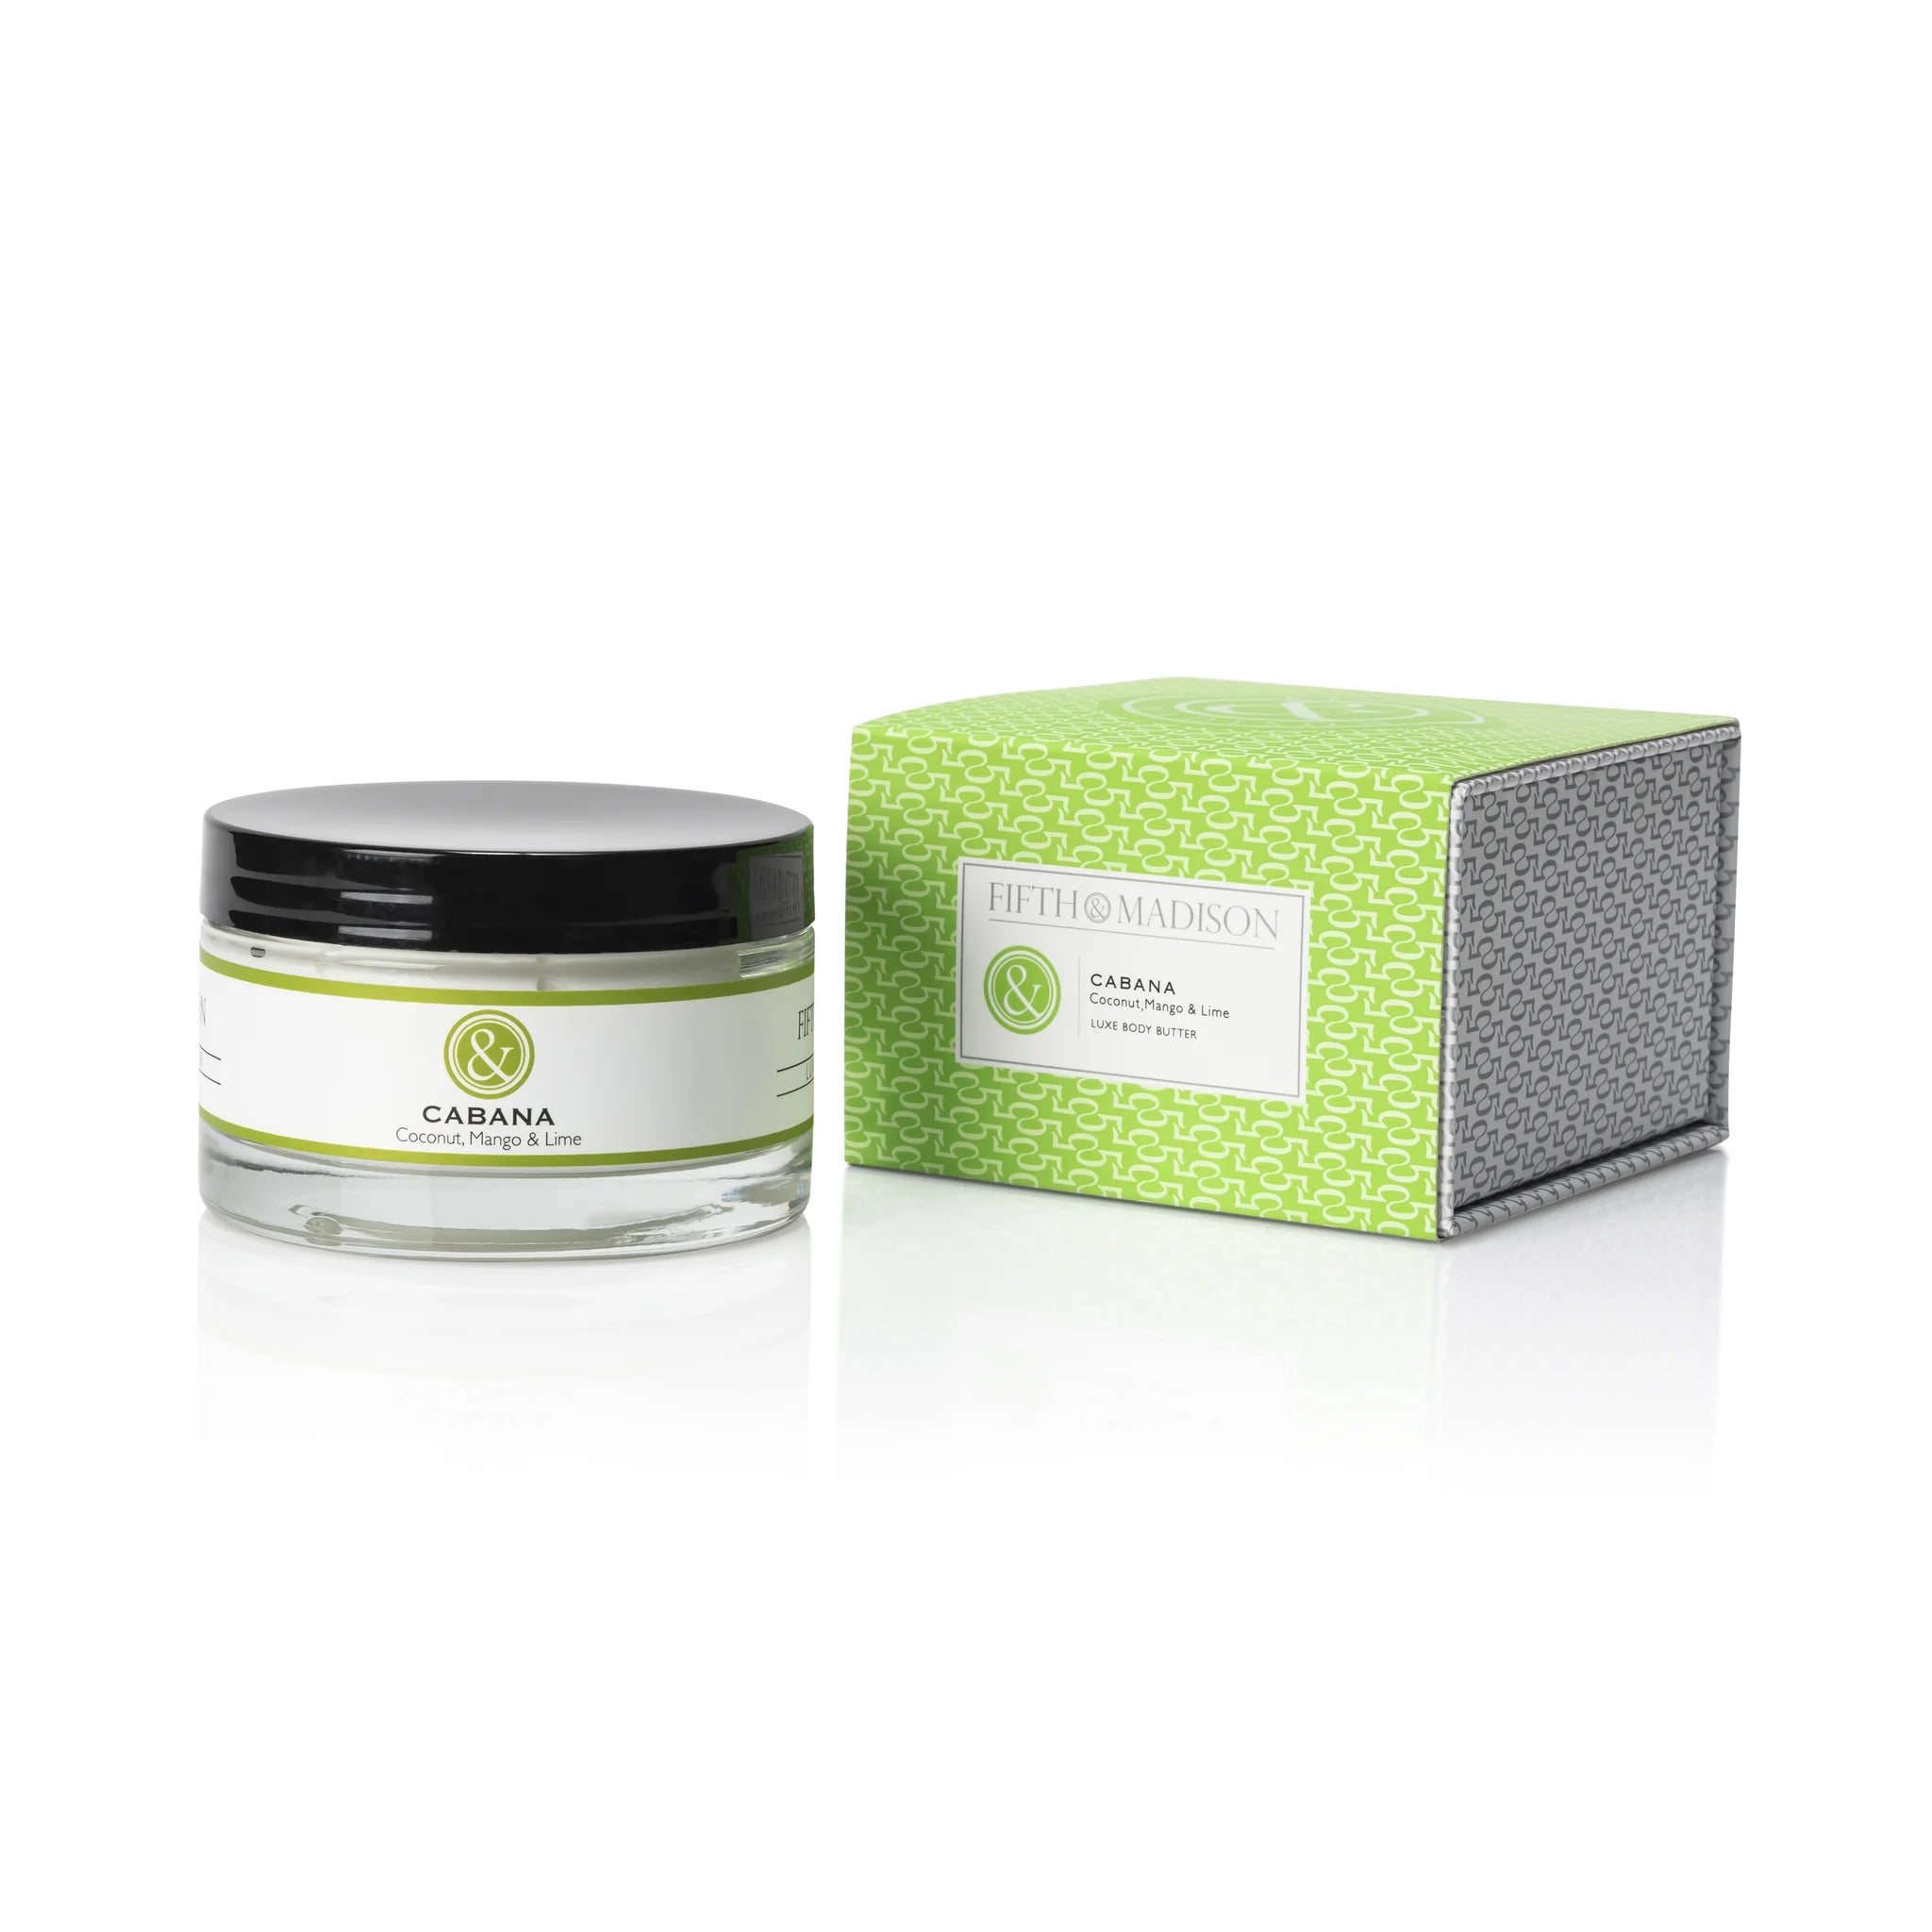 Cabana 5th & Madison Luxe Body Butter